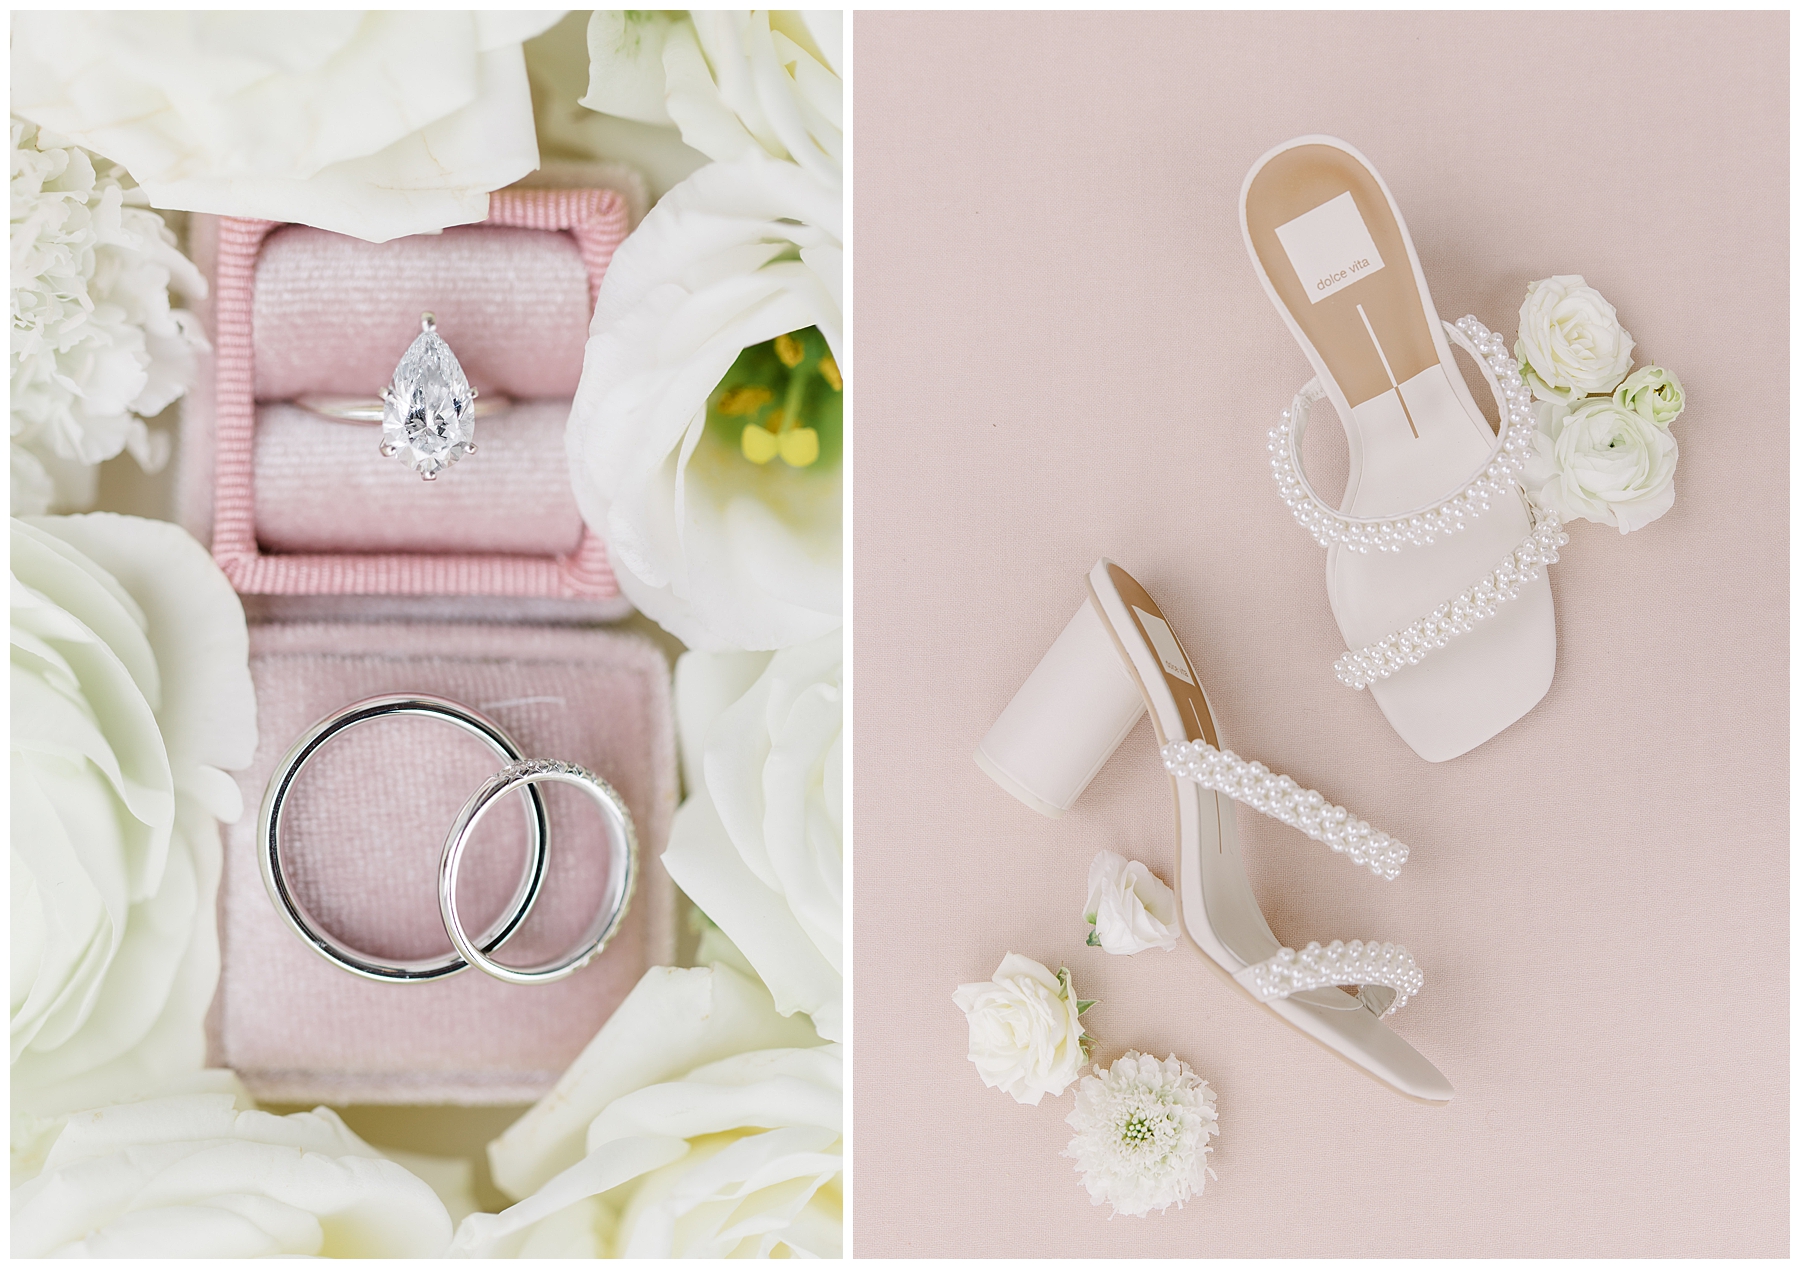 wedding rings in blush pink ring boxes and bride's wedding shoes